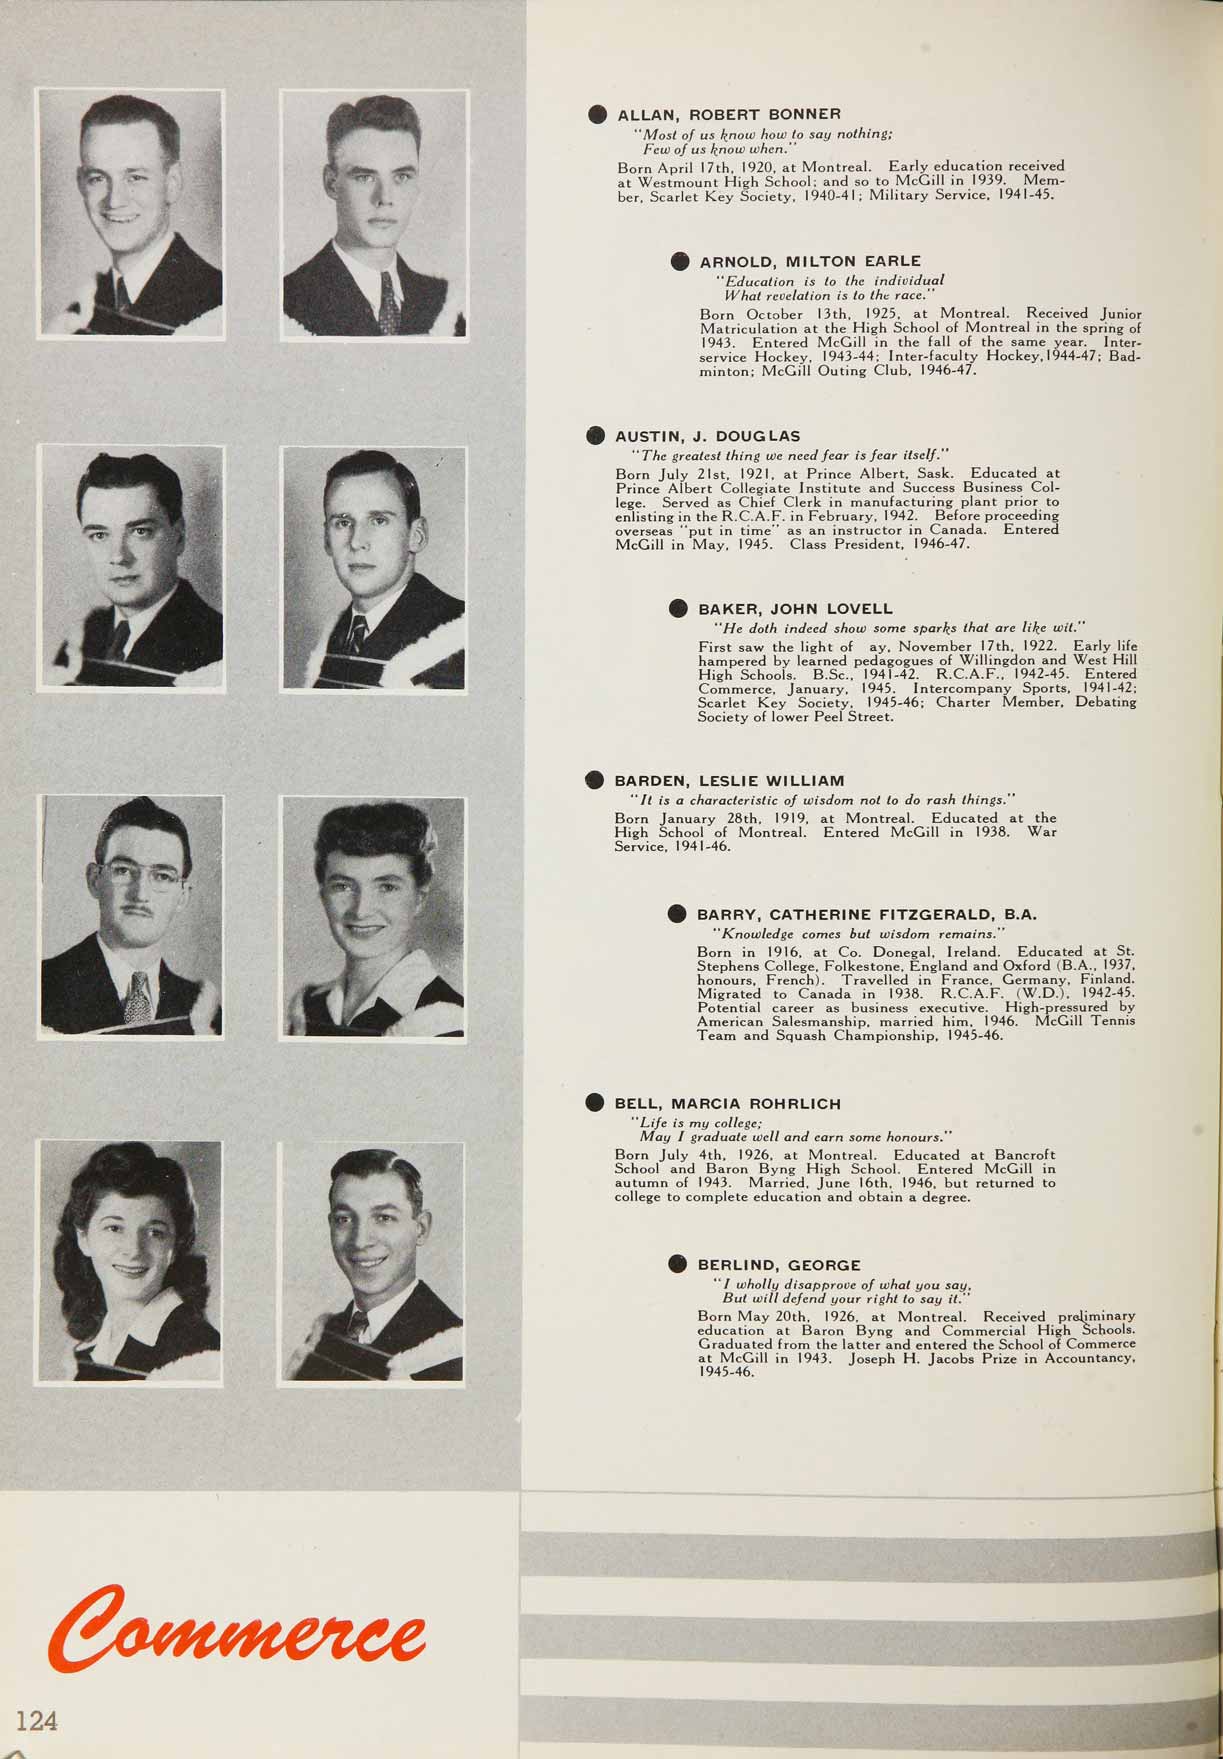 McGill Yearbook: 1947